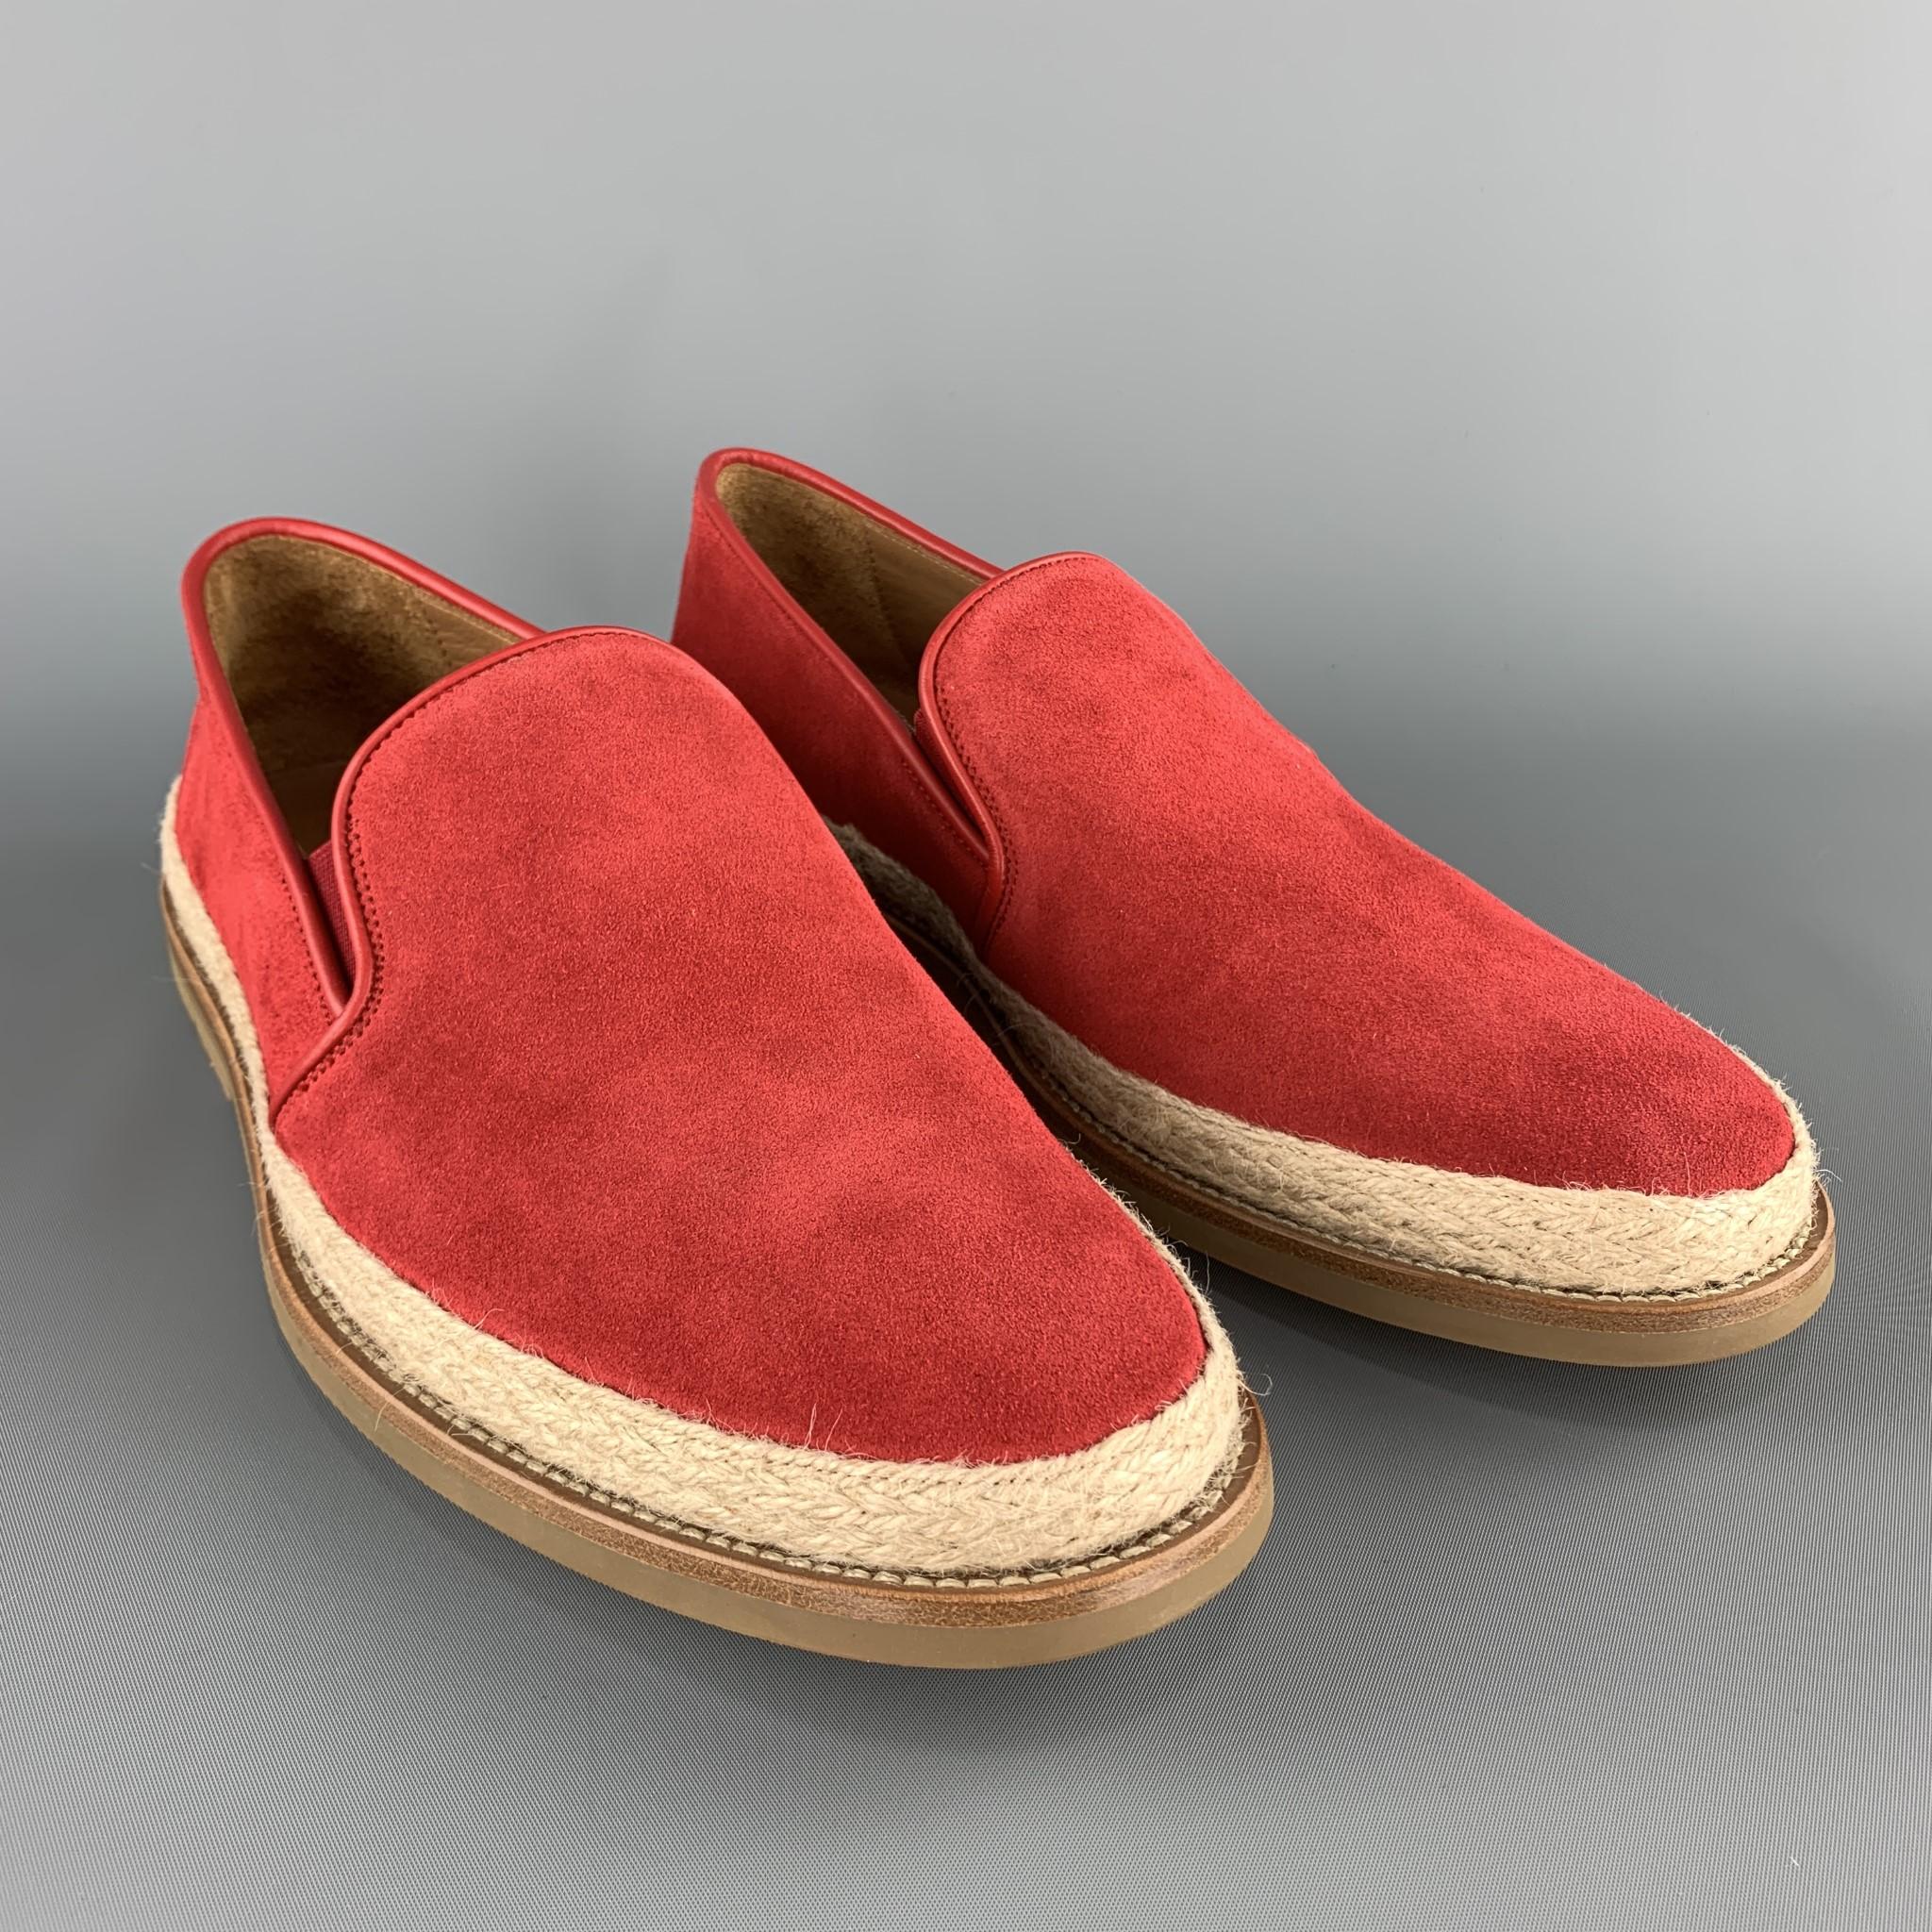 AQUATALIA loafers come in red suede with a braided rope trim and rubber sole. Made in Italy.

Excellent Pre-Owned Condition.
Marked: UK 10

Outsole: 12.25 x 4.75 in.
SKU: 103509
Category: Loafers

More Details
Brand: AQUATALIA
Size: 11
Color: